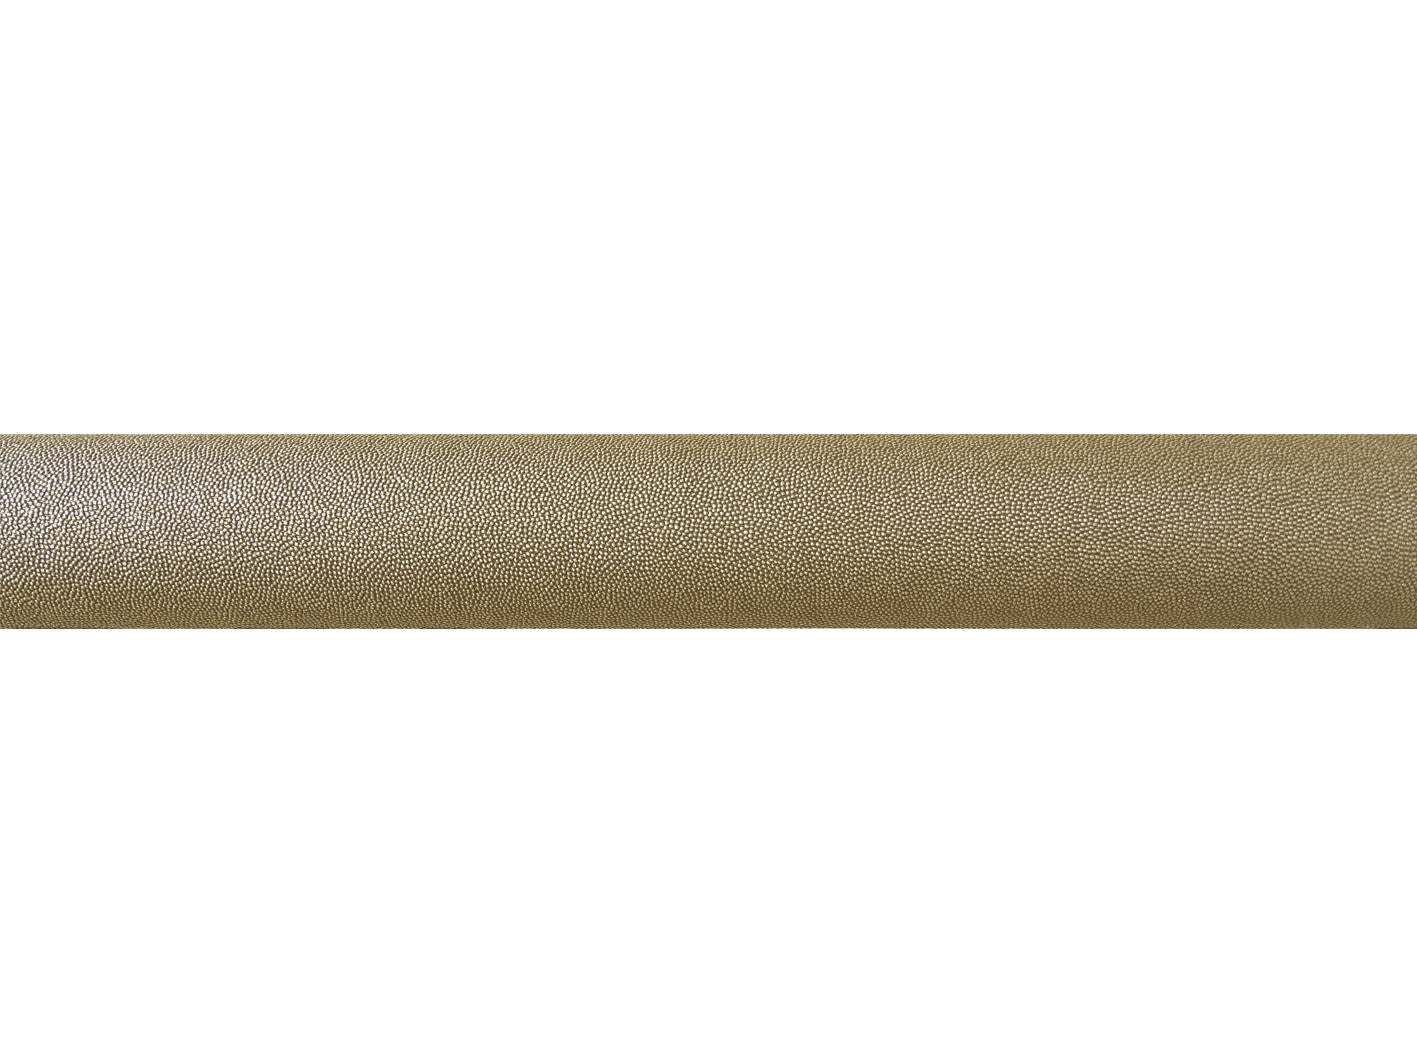 shagreen textured honeycomb tracked antique gold curtain pole by Walcot House